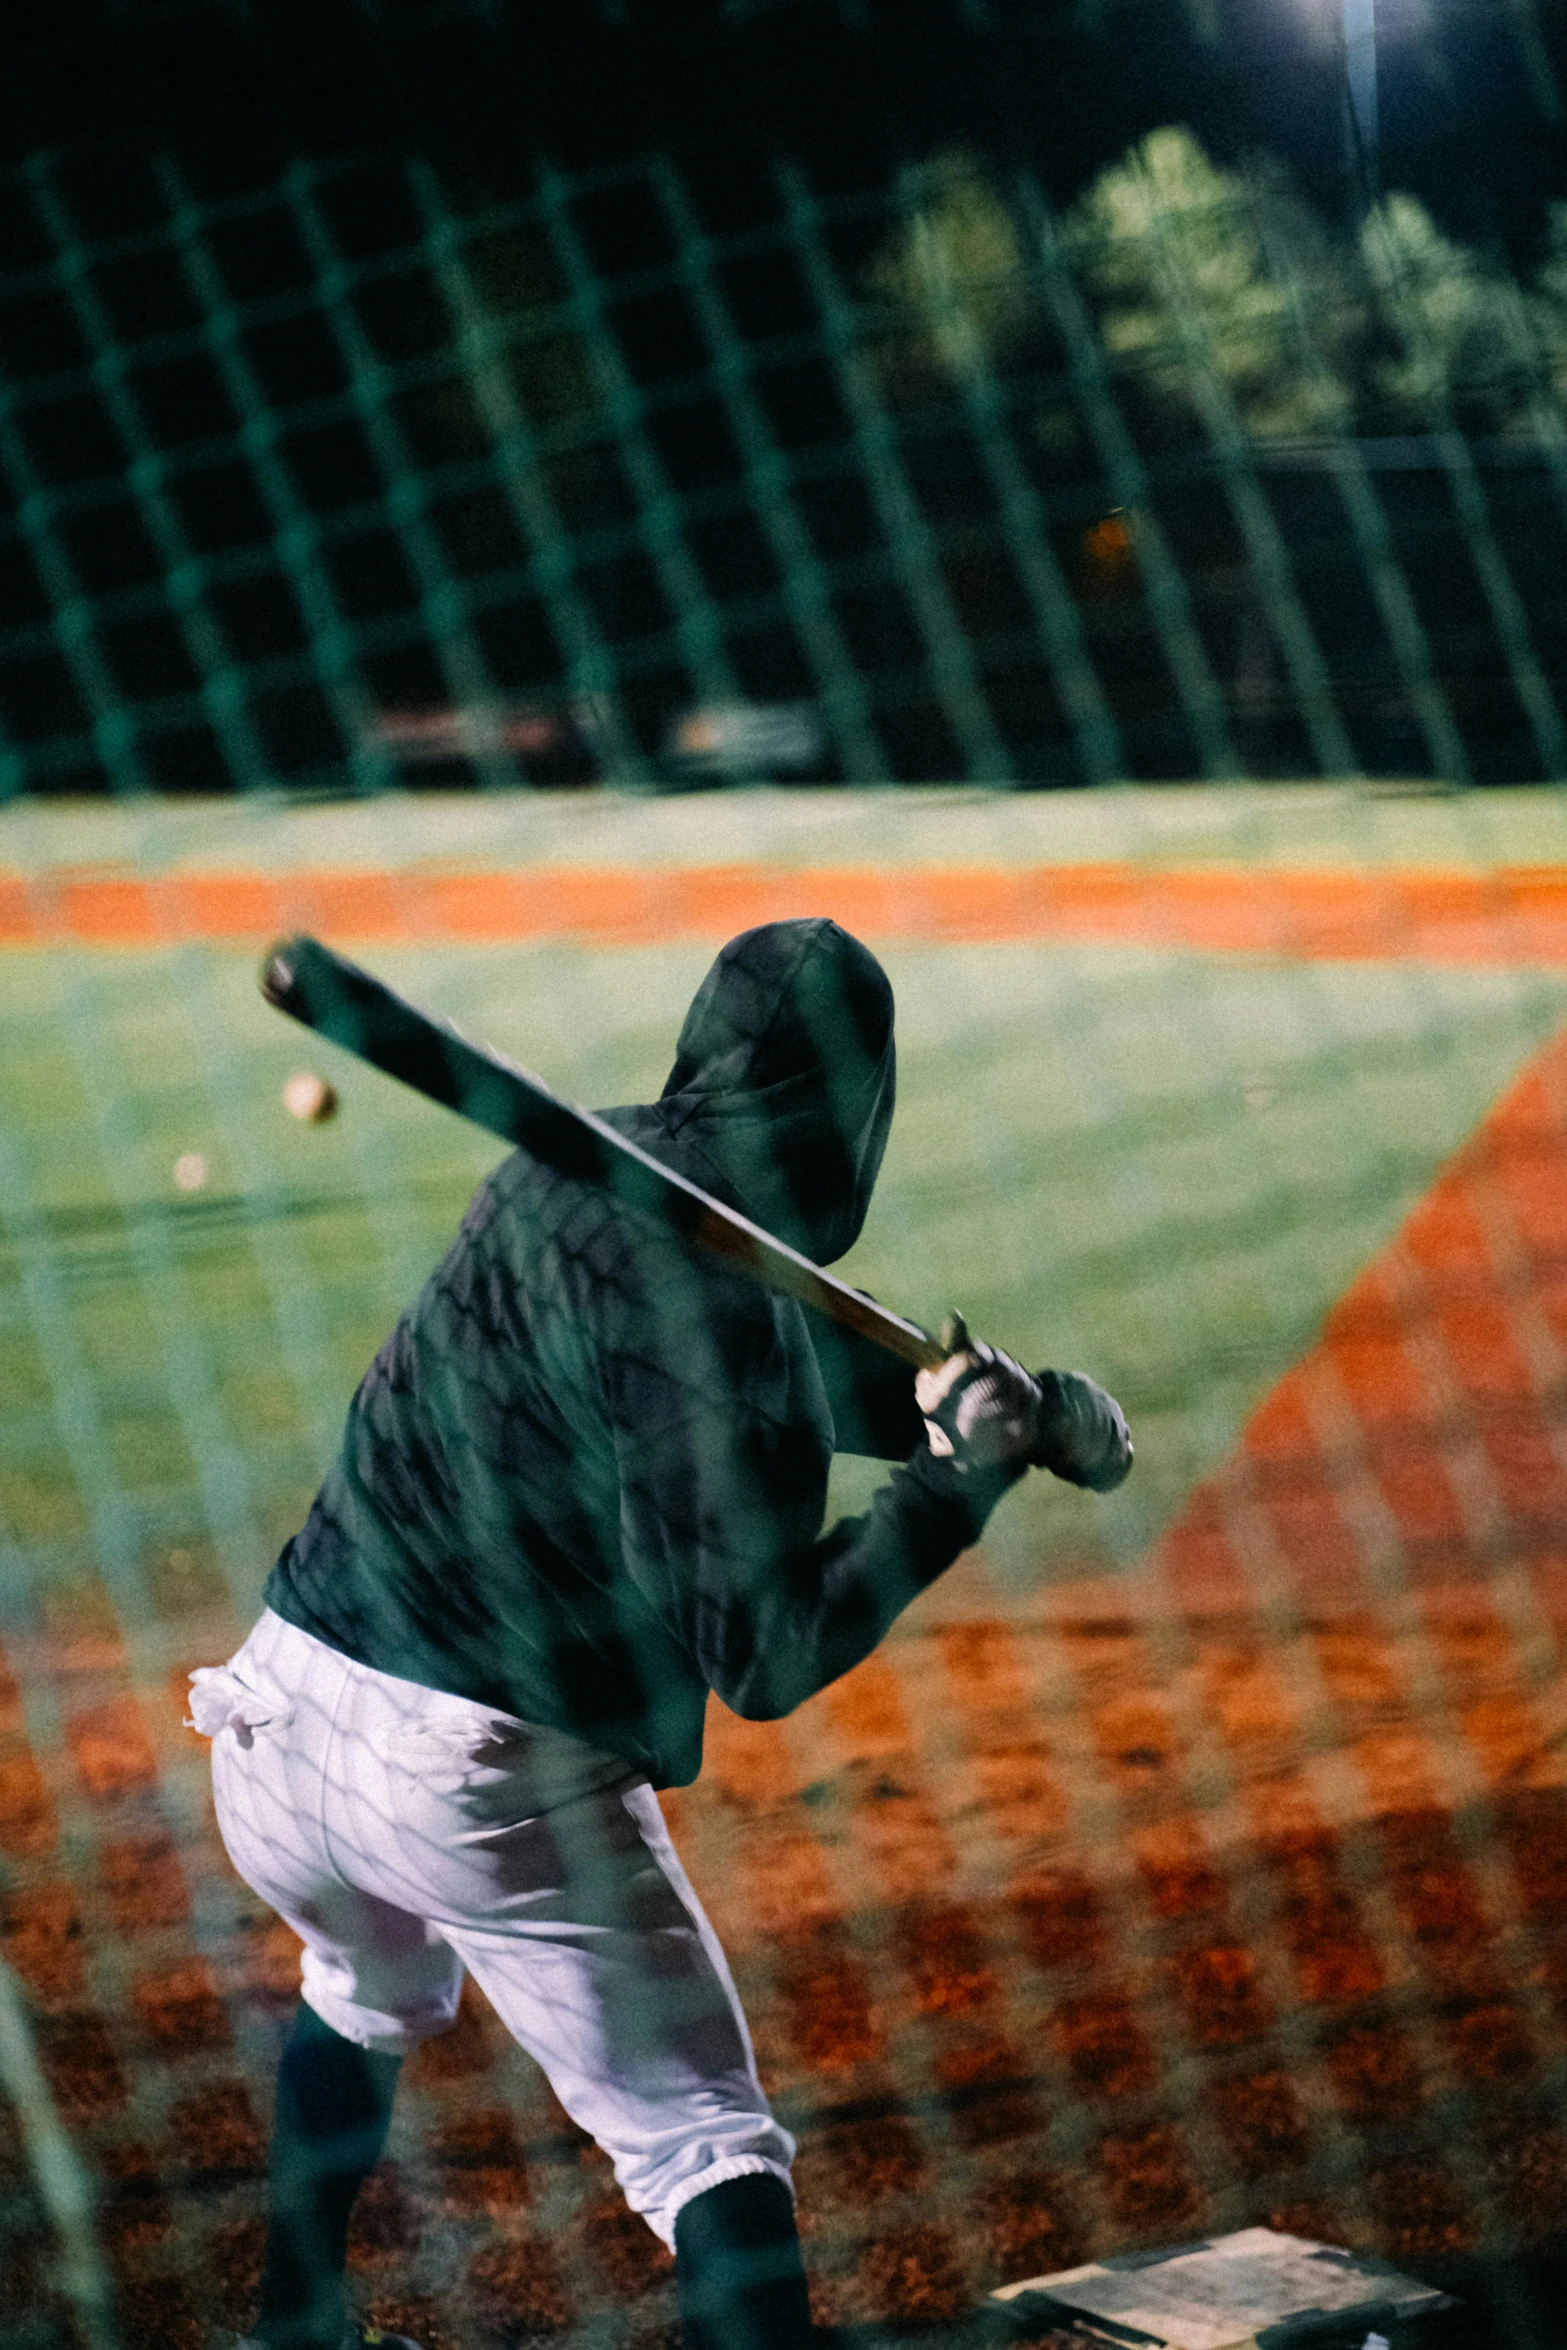 a person in action playing baseball while in the field